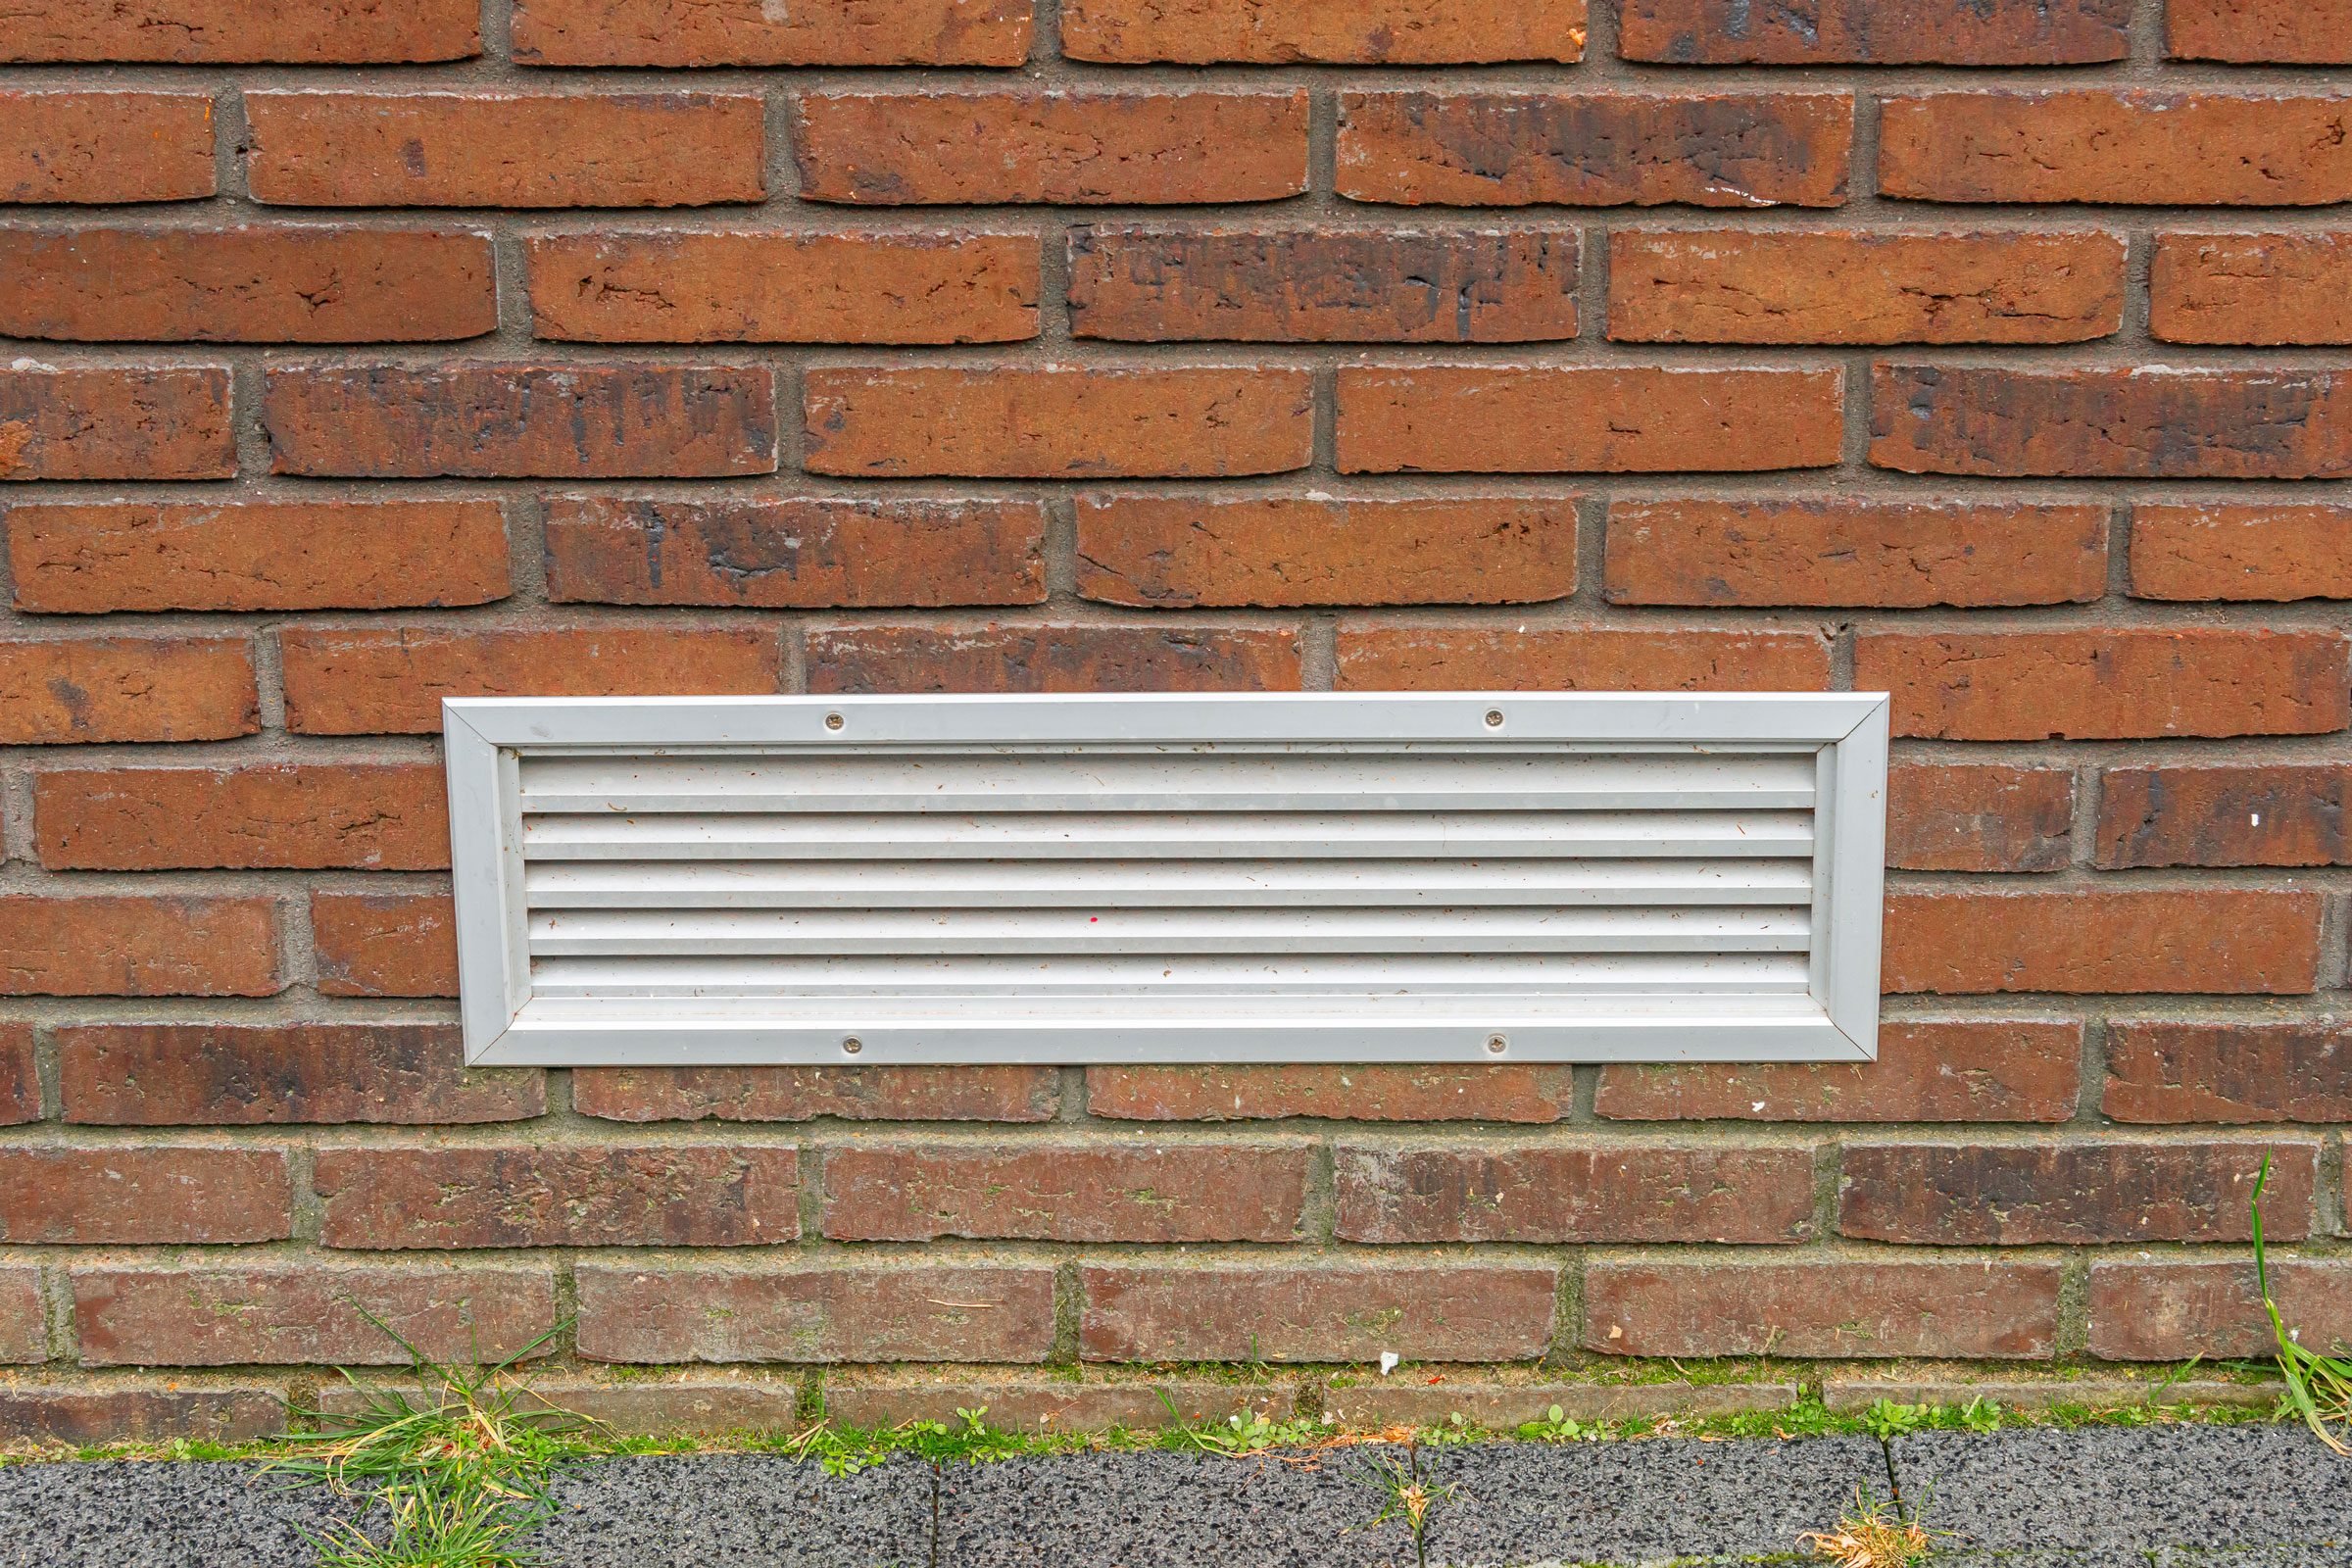 Should You Add Flood Vents to Your Home?